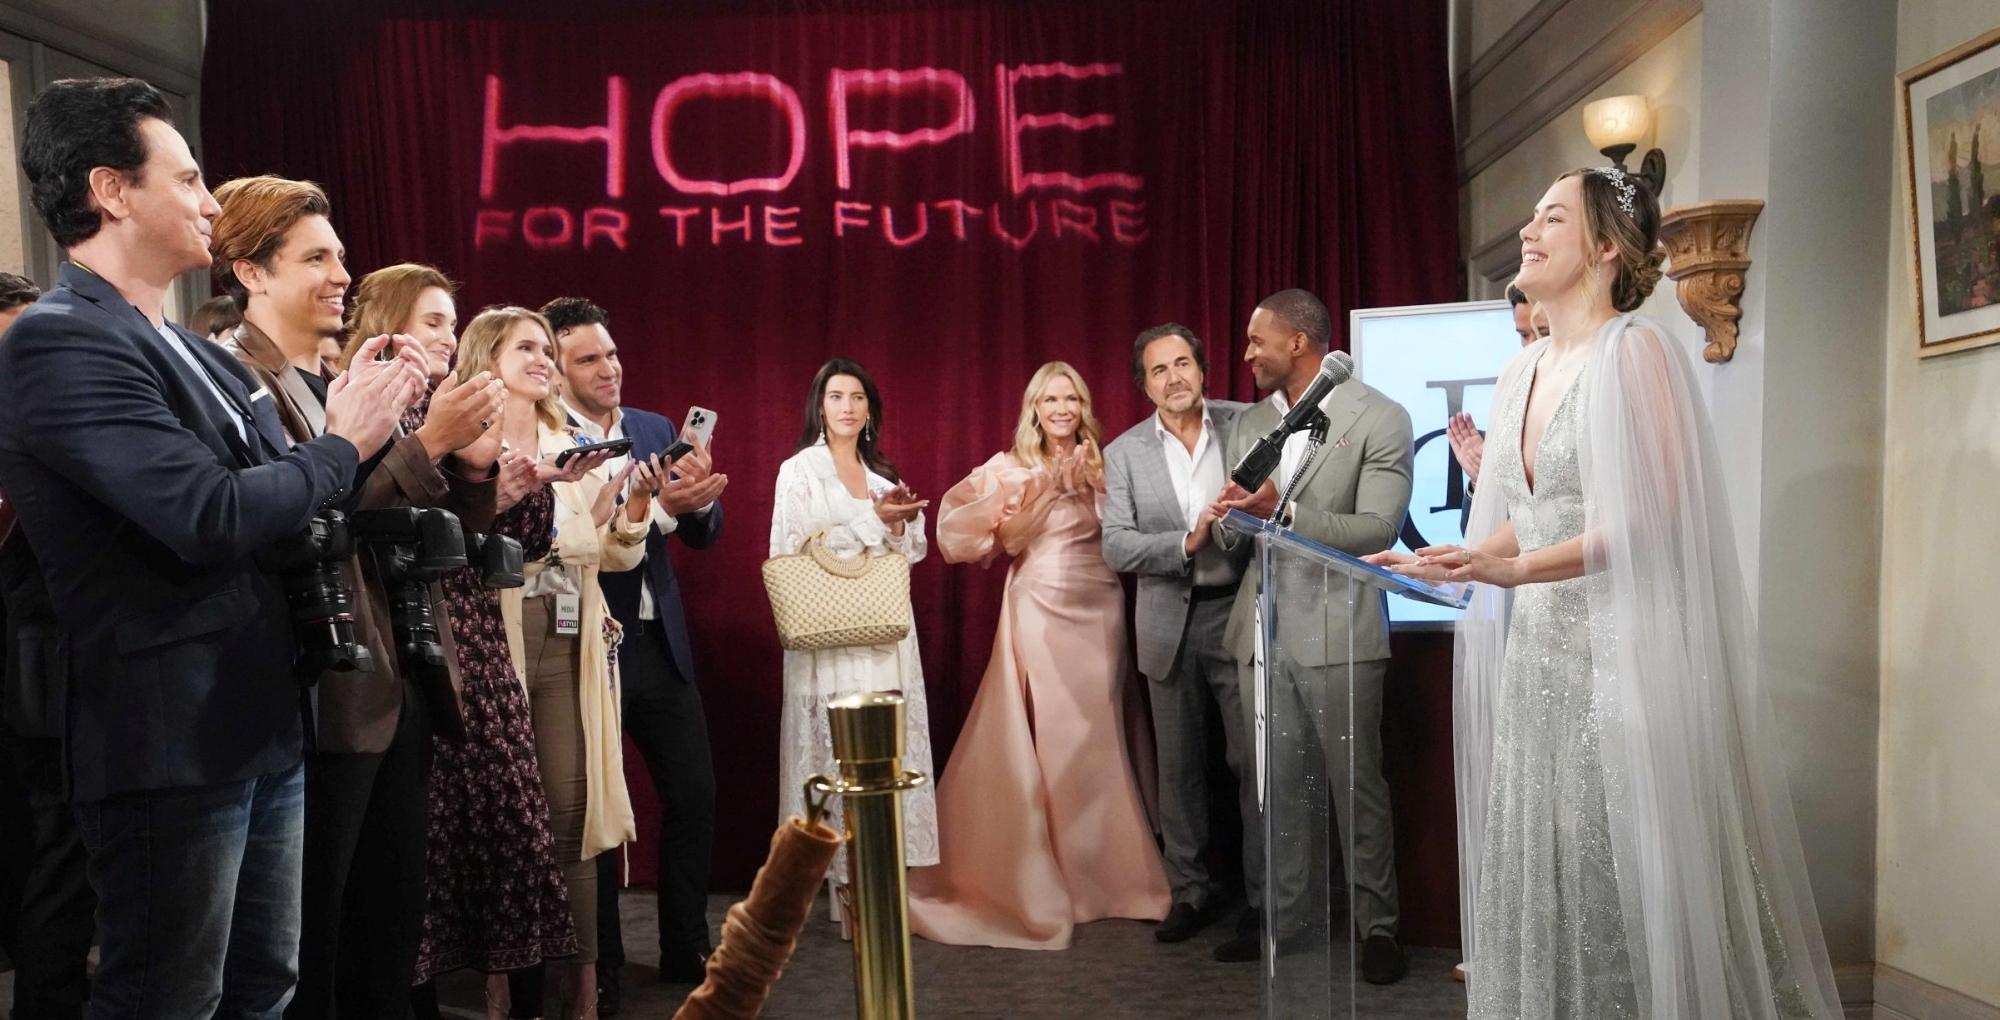 bold and the beautiful spoilers see hope for the future on the runway.